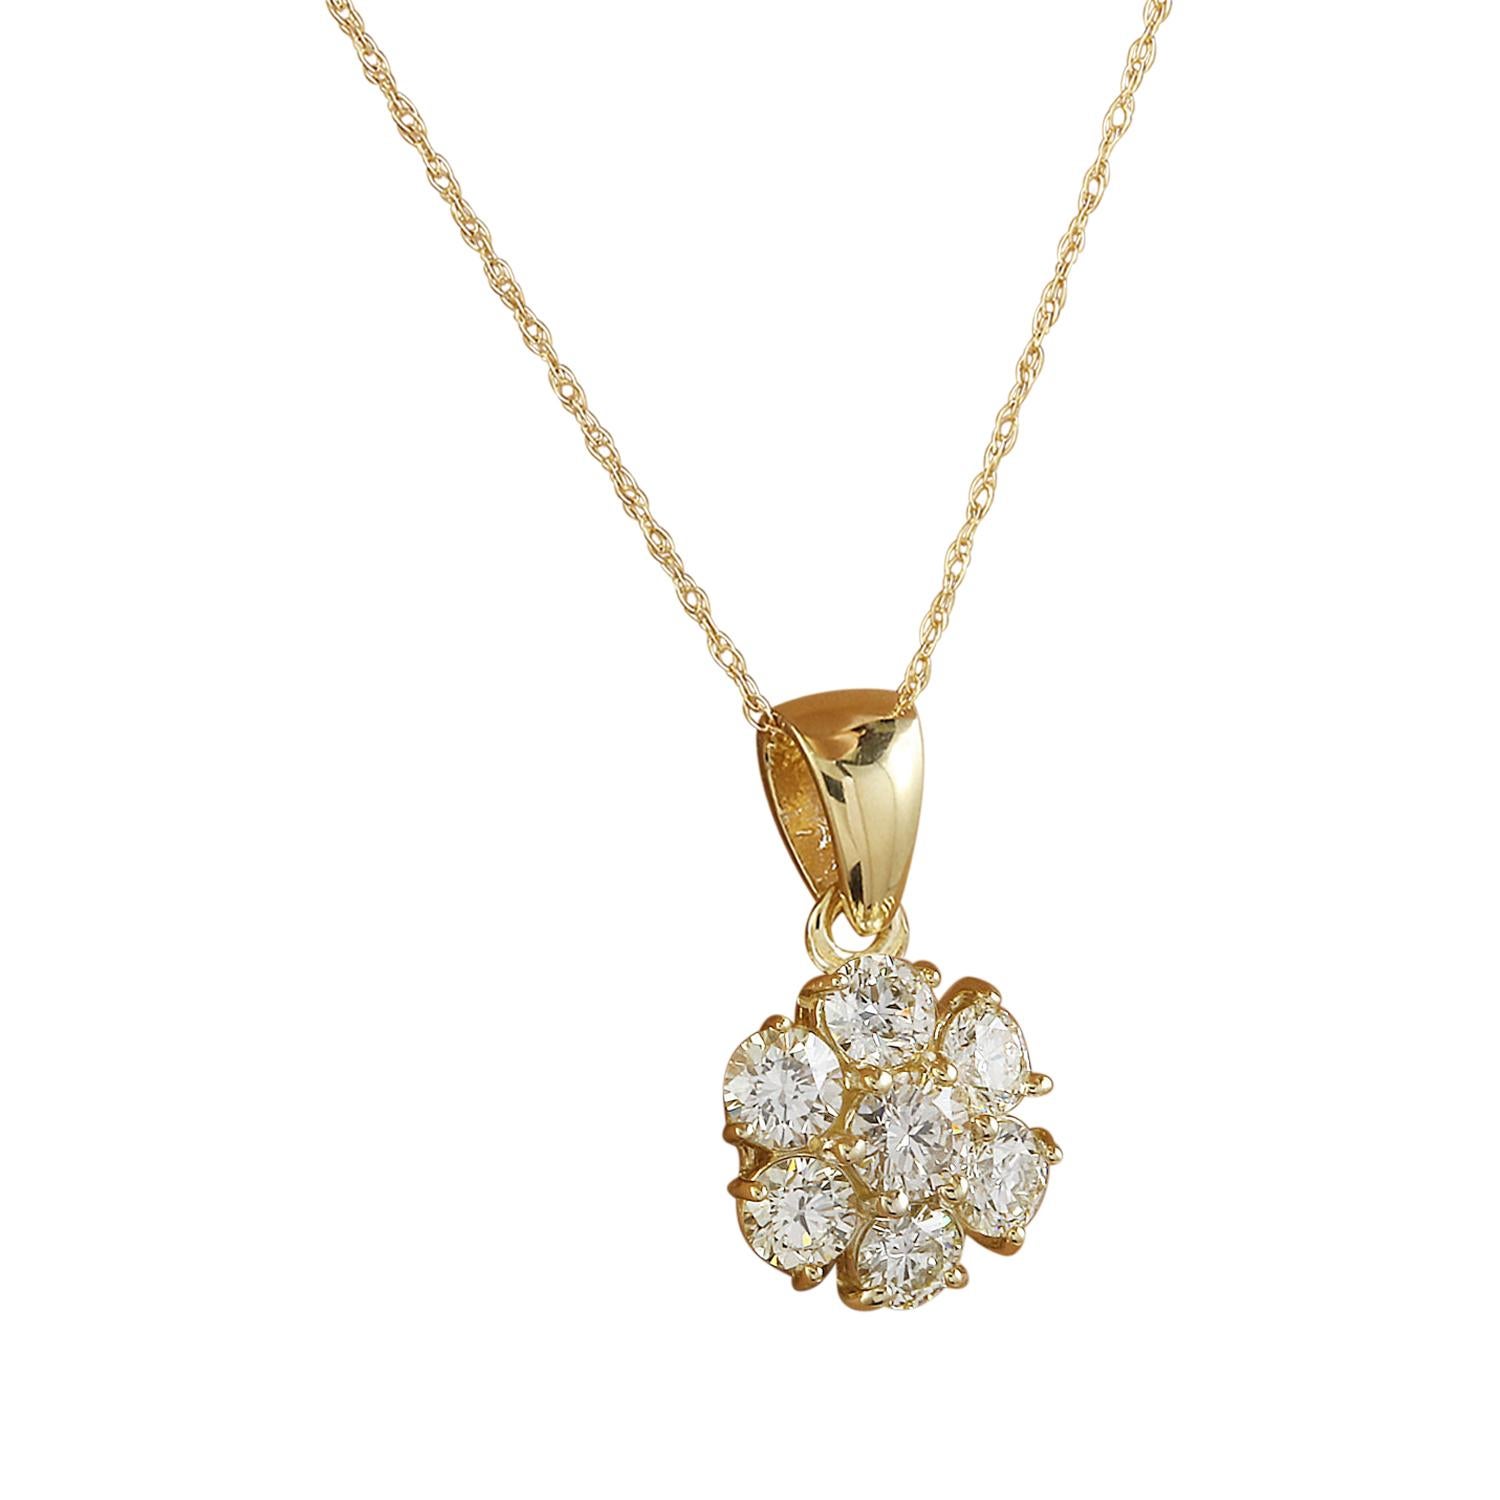 Introducing our elegant 0.70 Carat Natural Diamond Necklace in 14 Karat Yellow Gold. Crafted from stamped 14K white gold, this necklace boasts a total weight of 1.4 grams, ensuring both quality and comfort. Adorning the neckline, the necklace